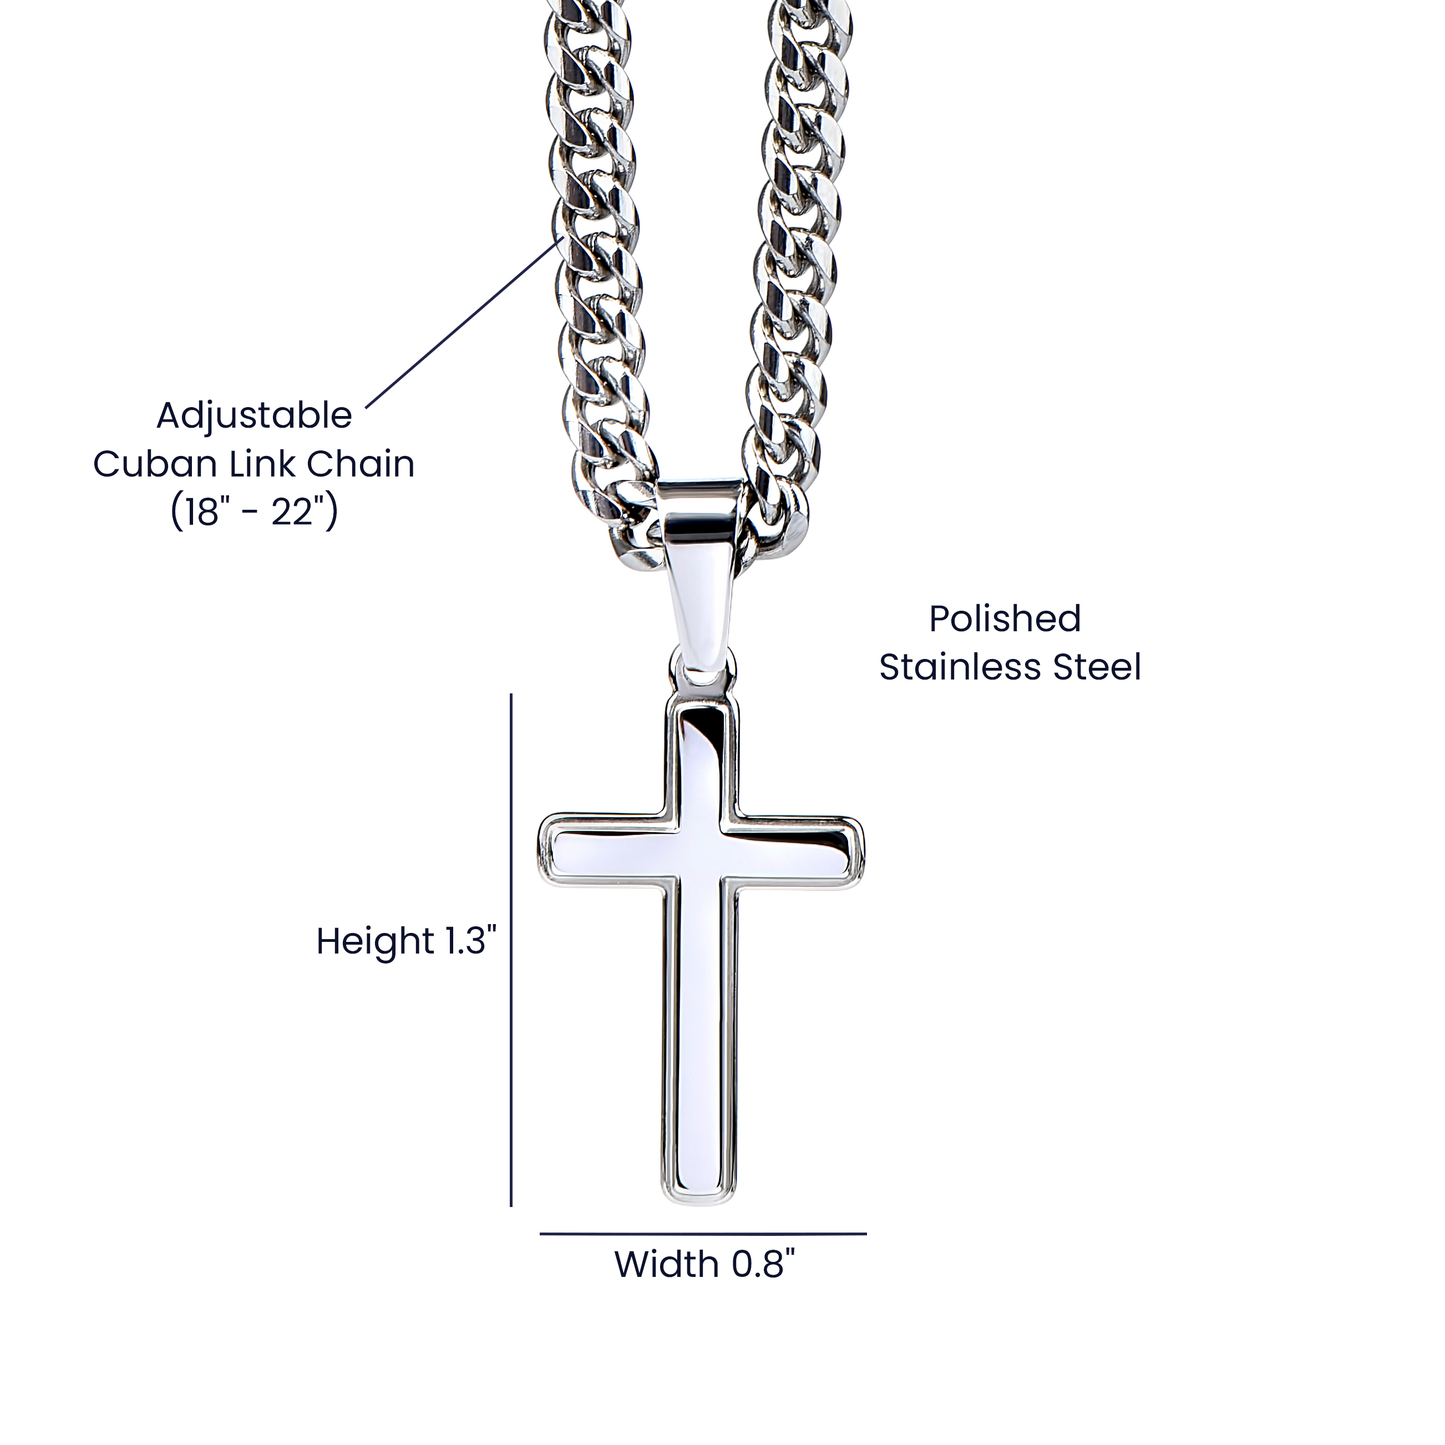 To Grandson Gift, God is Always in your Corner, Encouragement From Grandparents, Stainless Steel Cross Pendant Chain Necklace